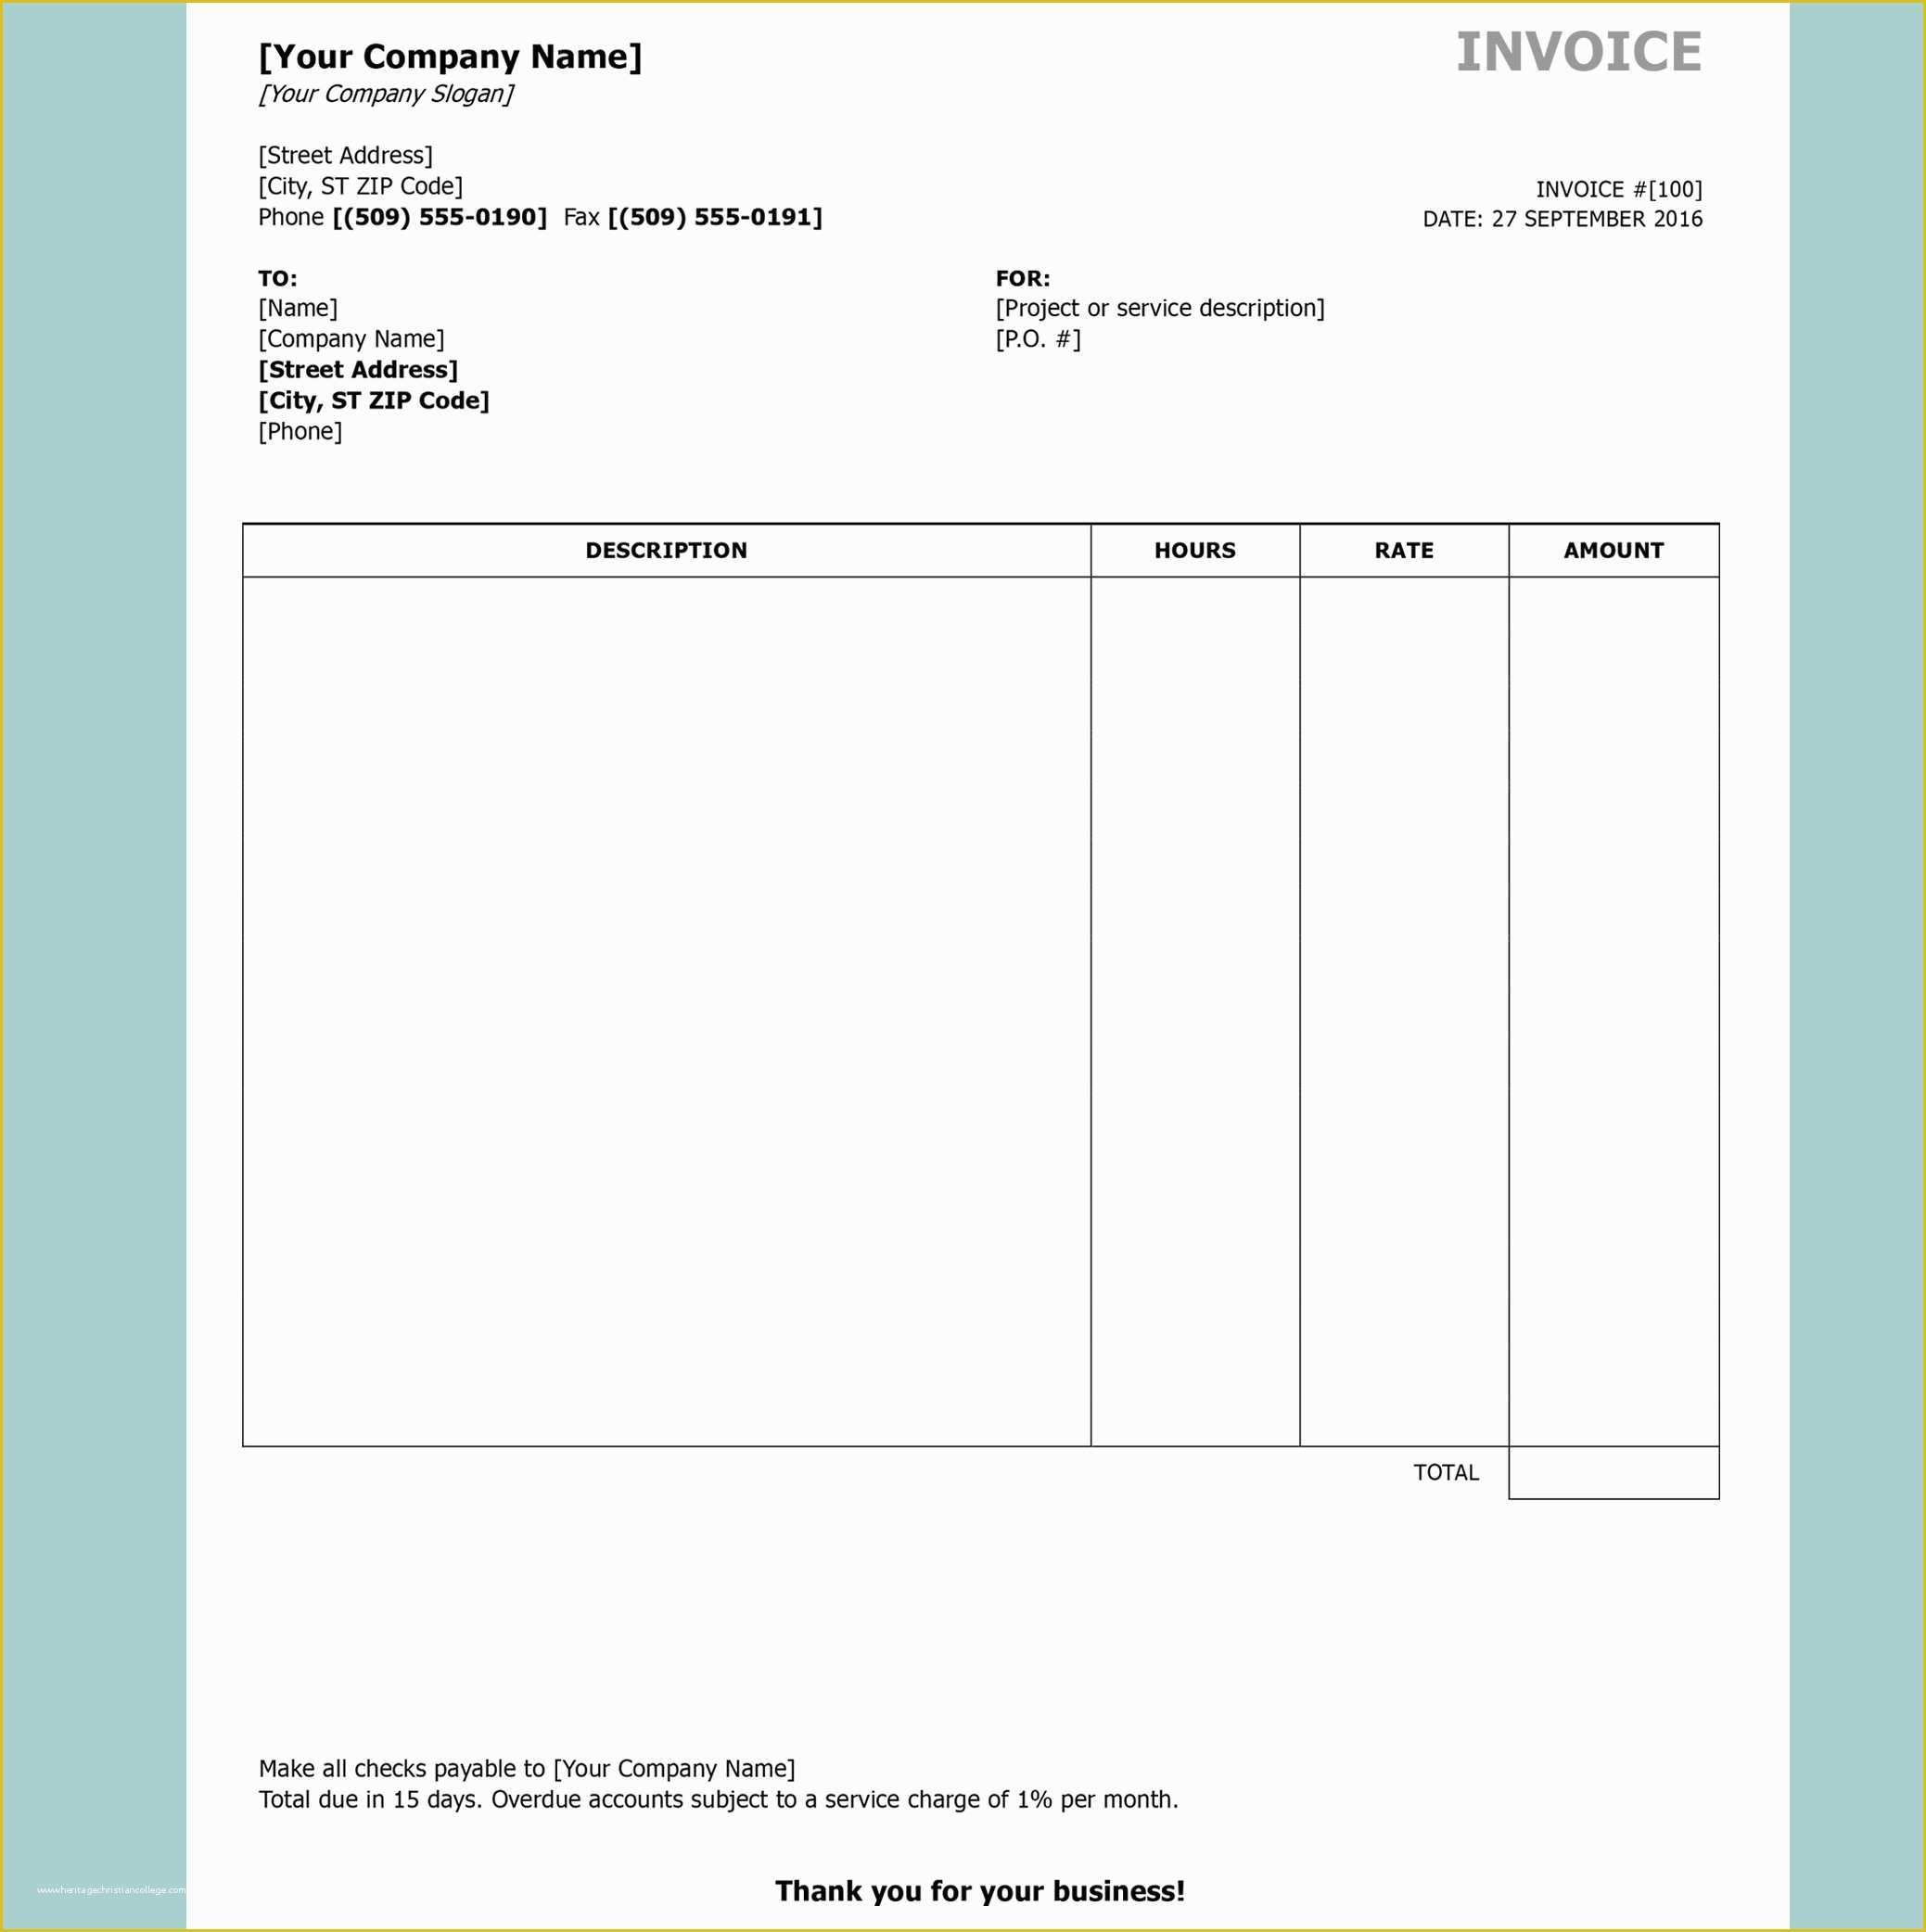 Free Online Invoice Template Of Free Invoice Templates by Invoiceberry the Grid System